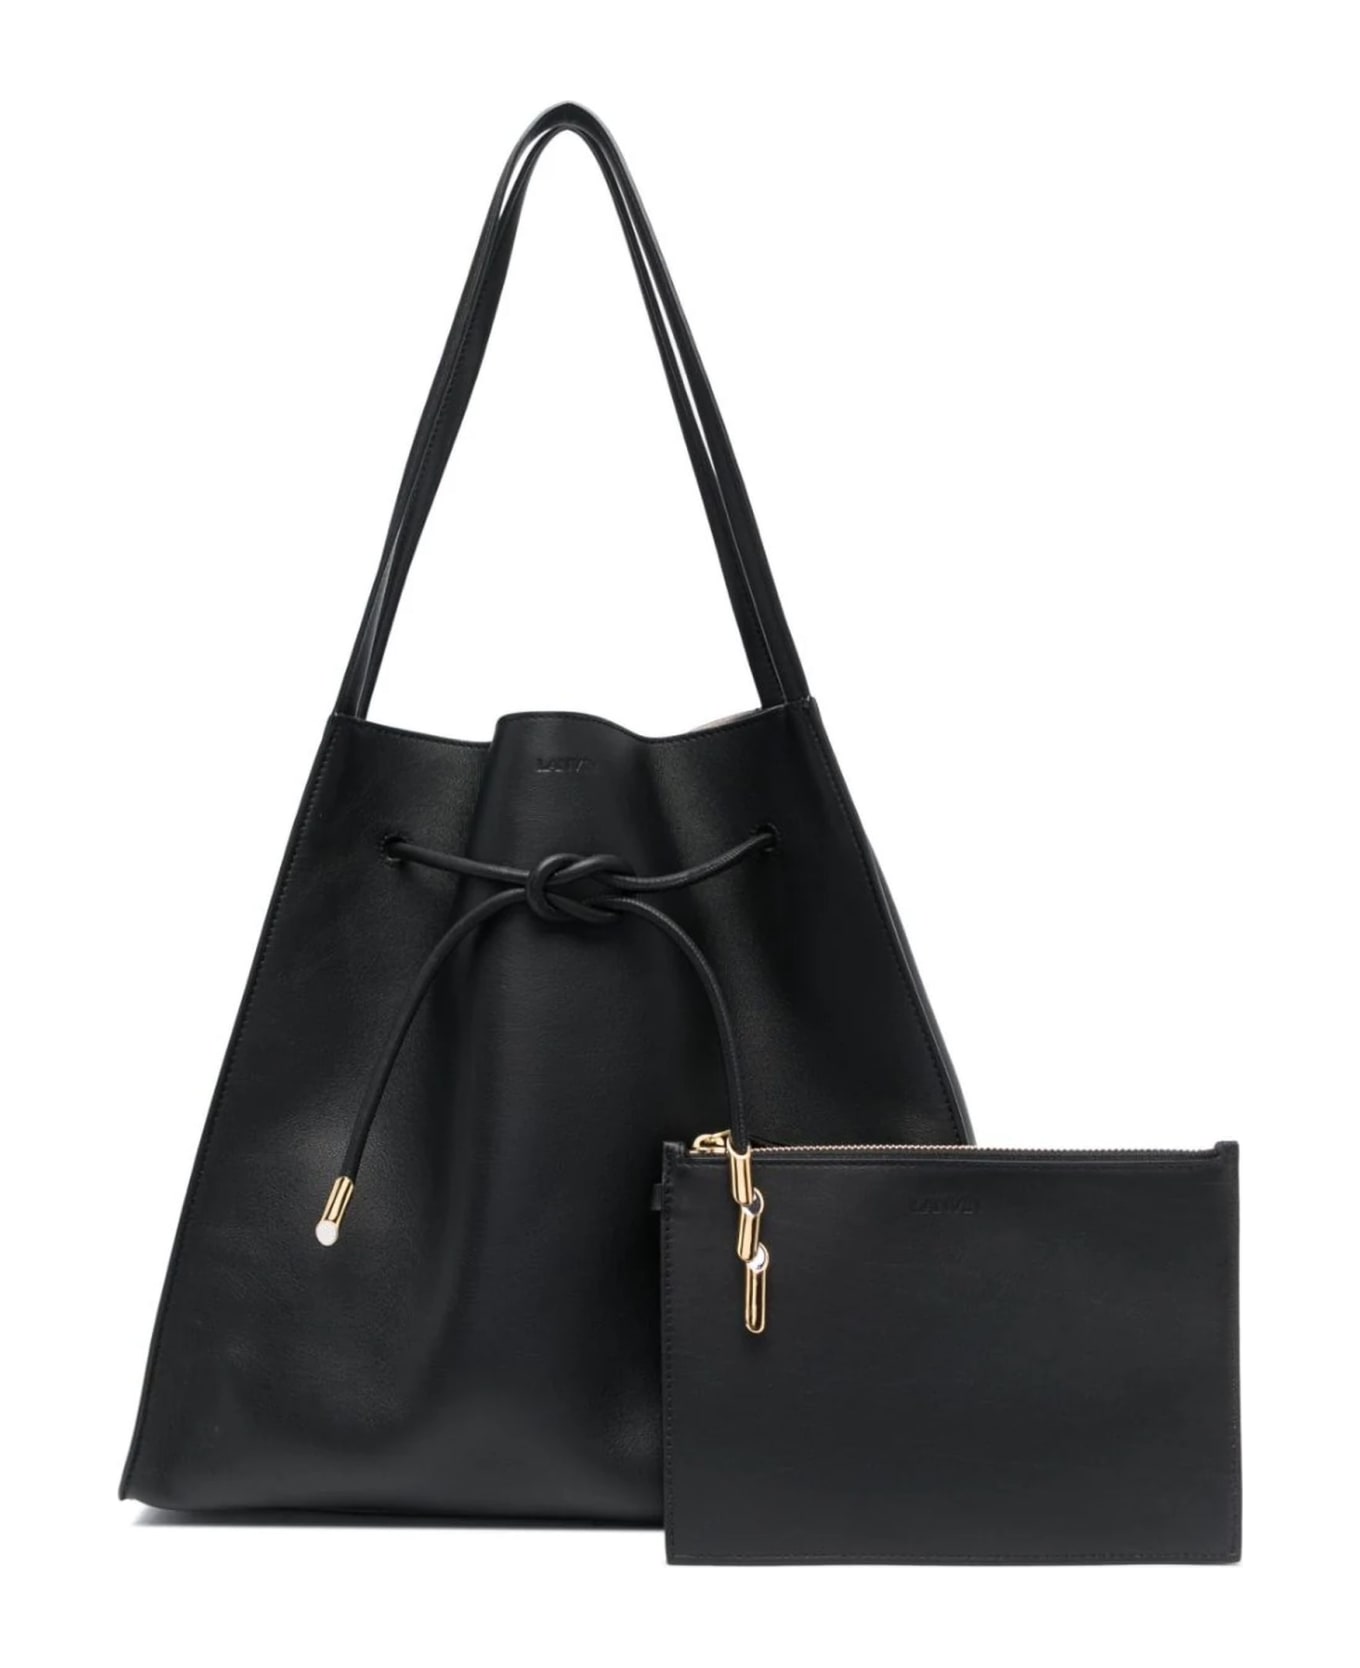 Lanvin Medium Sequence Leather Tote Bag - Black トートバッグ